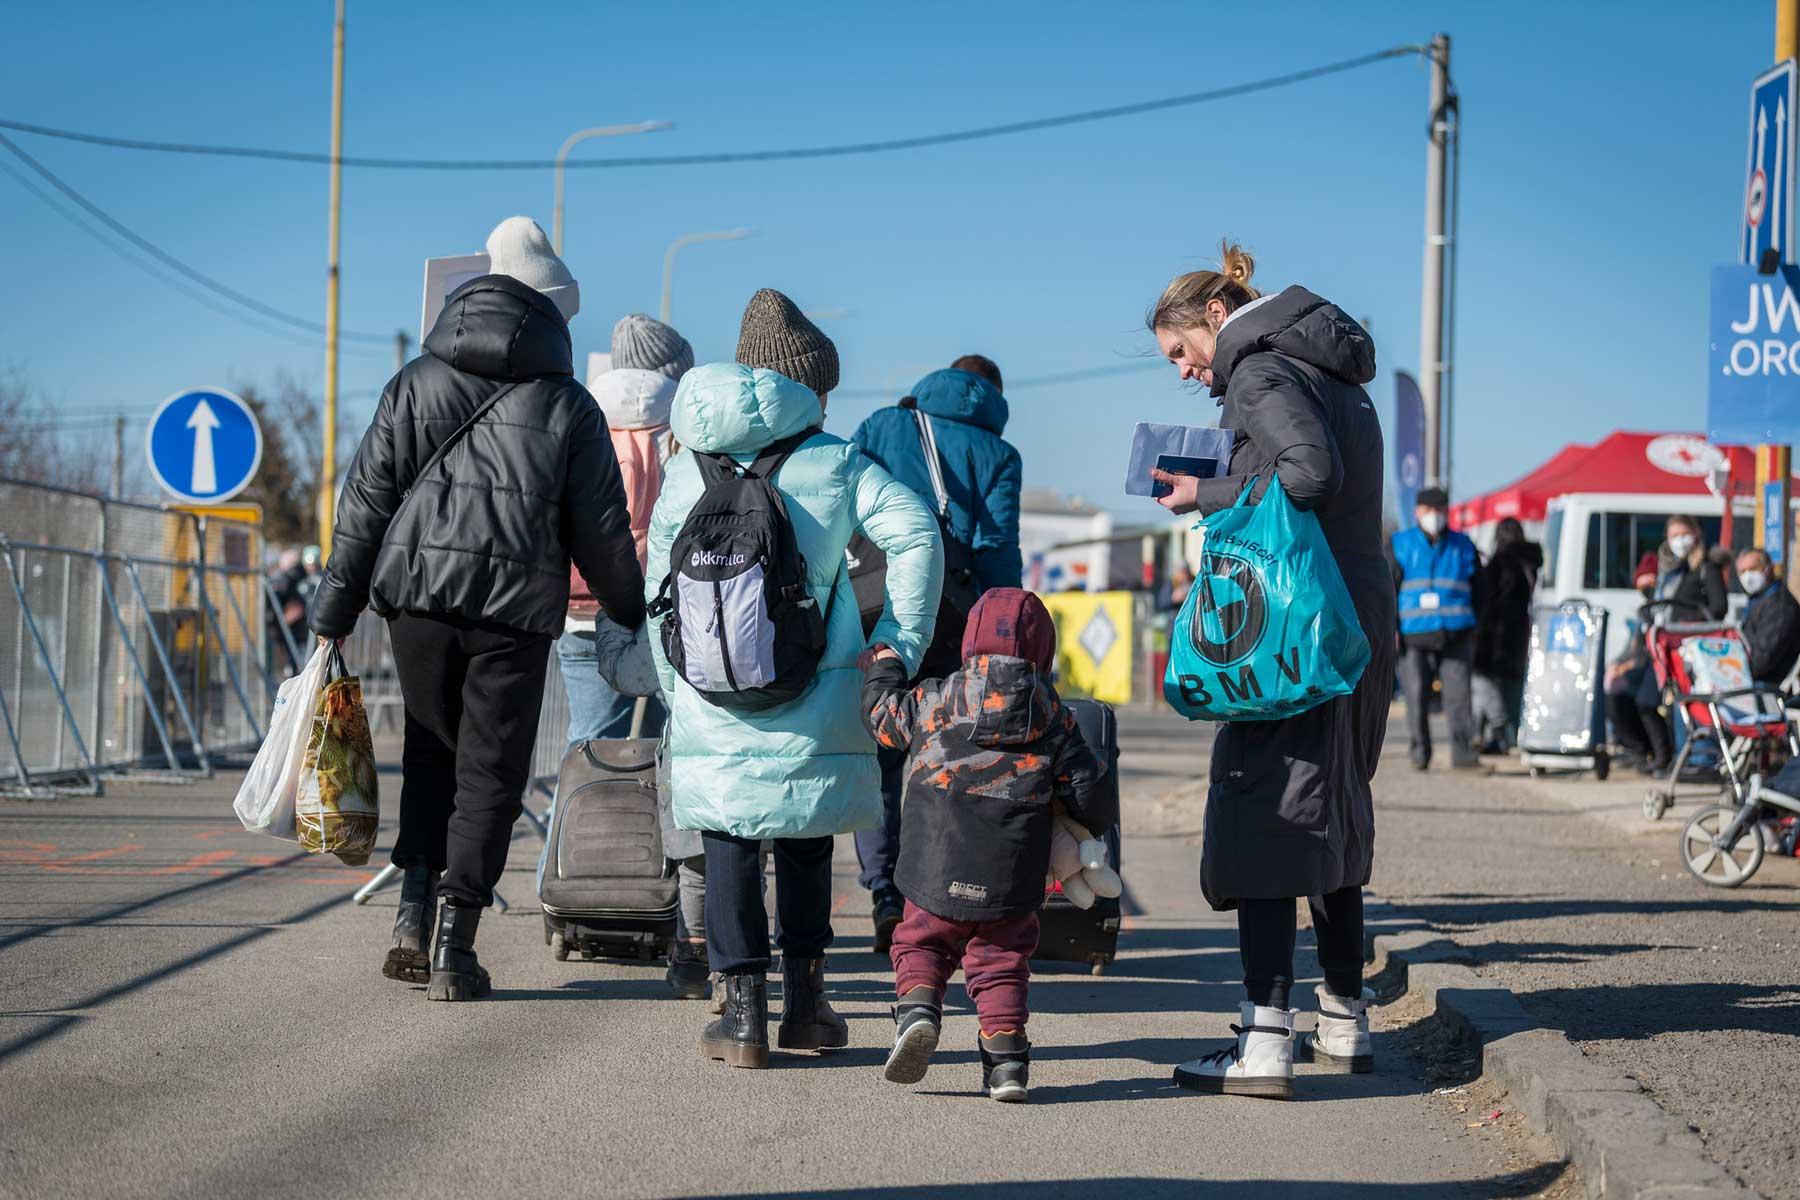 Women and children flee across the border between Slovakia and Ukraine following the Russian invasion in February 2022. Photo: LWF/A. Hillert